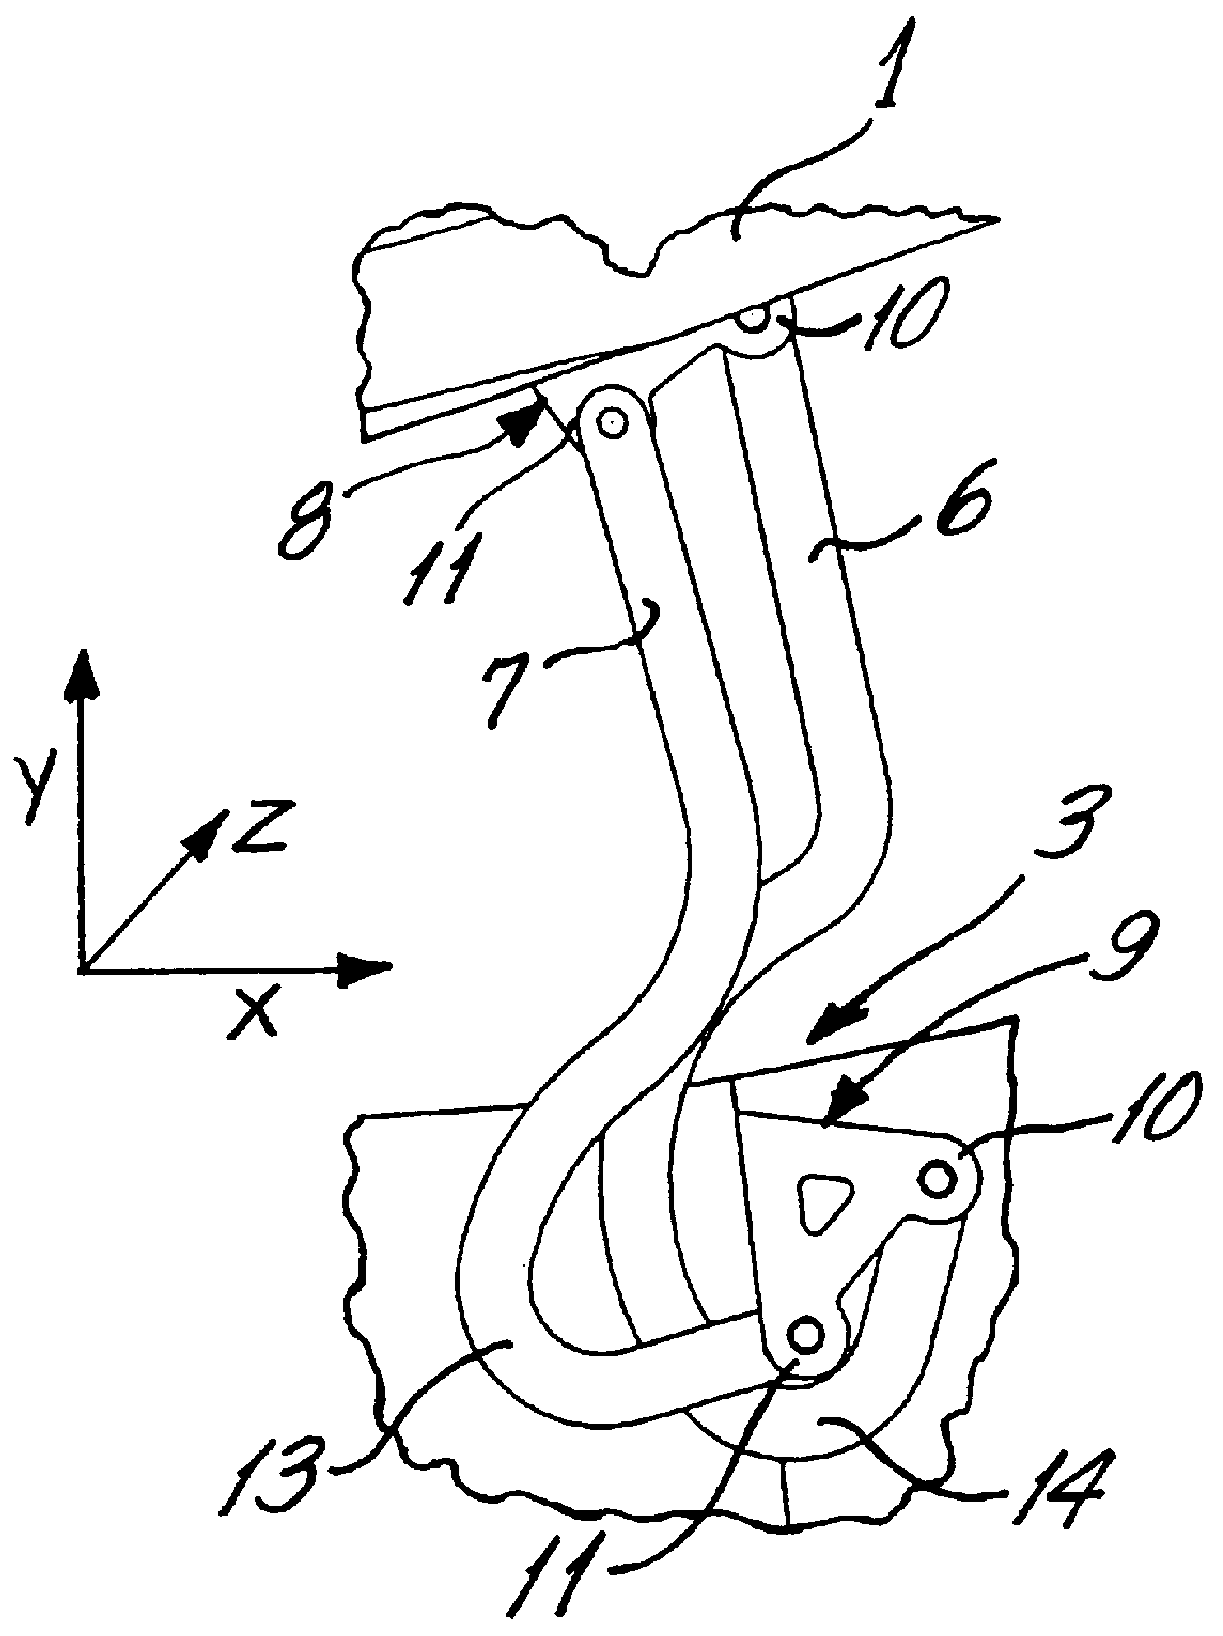 Articulated device for attaching a top storage well cover